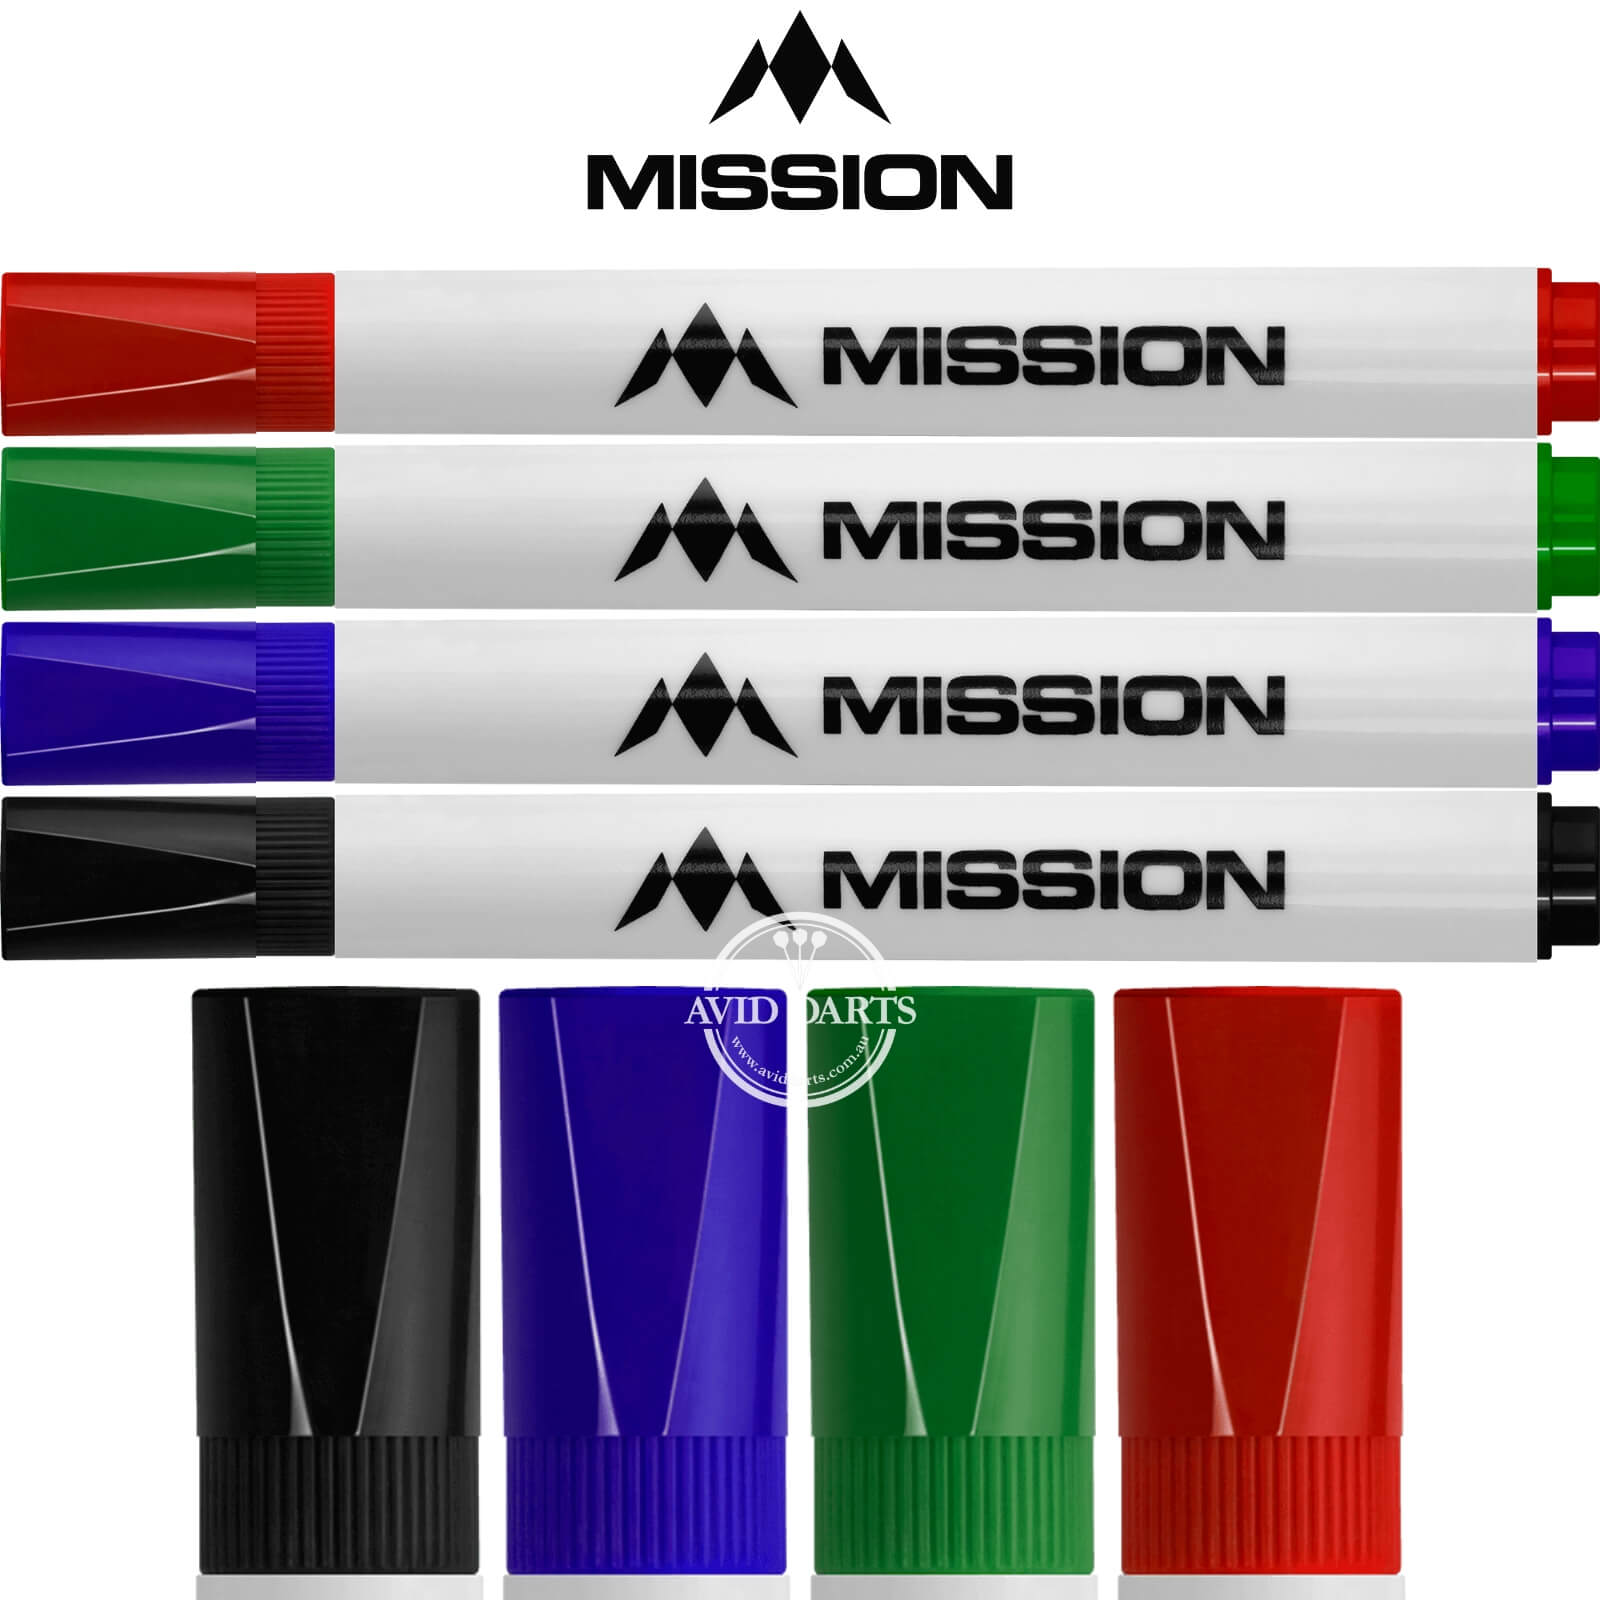 Scoring Accessories - Mission - Coloured Whiteboard Marker Pen Kit - 4 Pack 